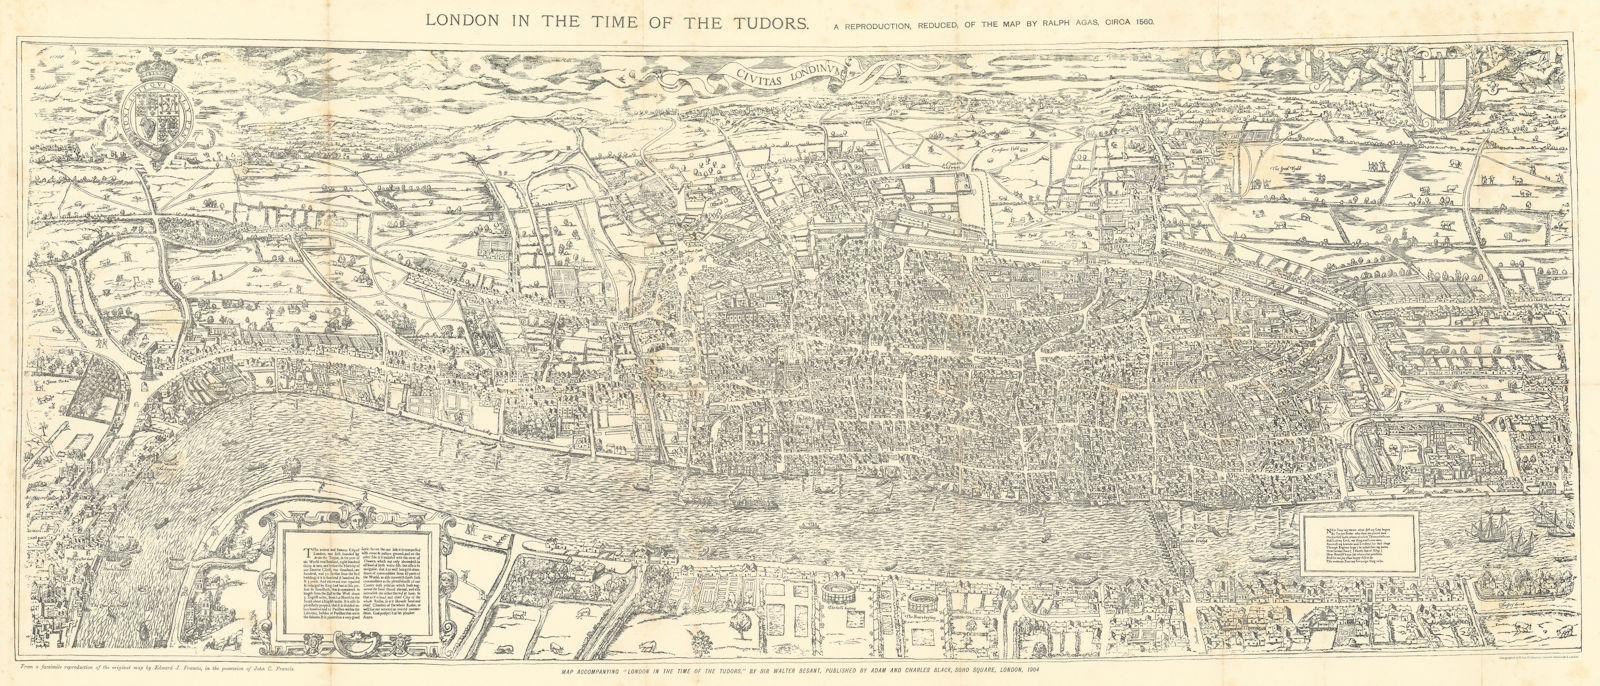 London in the time of the Tudors, circa 1560, after Ralph Agas. 41x96cm 1908 map